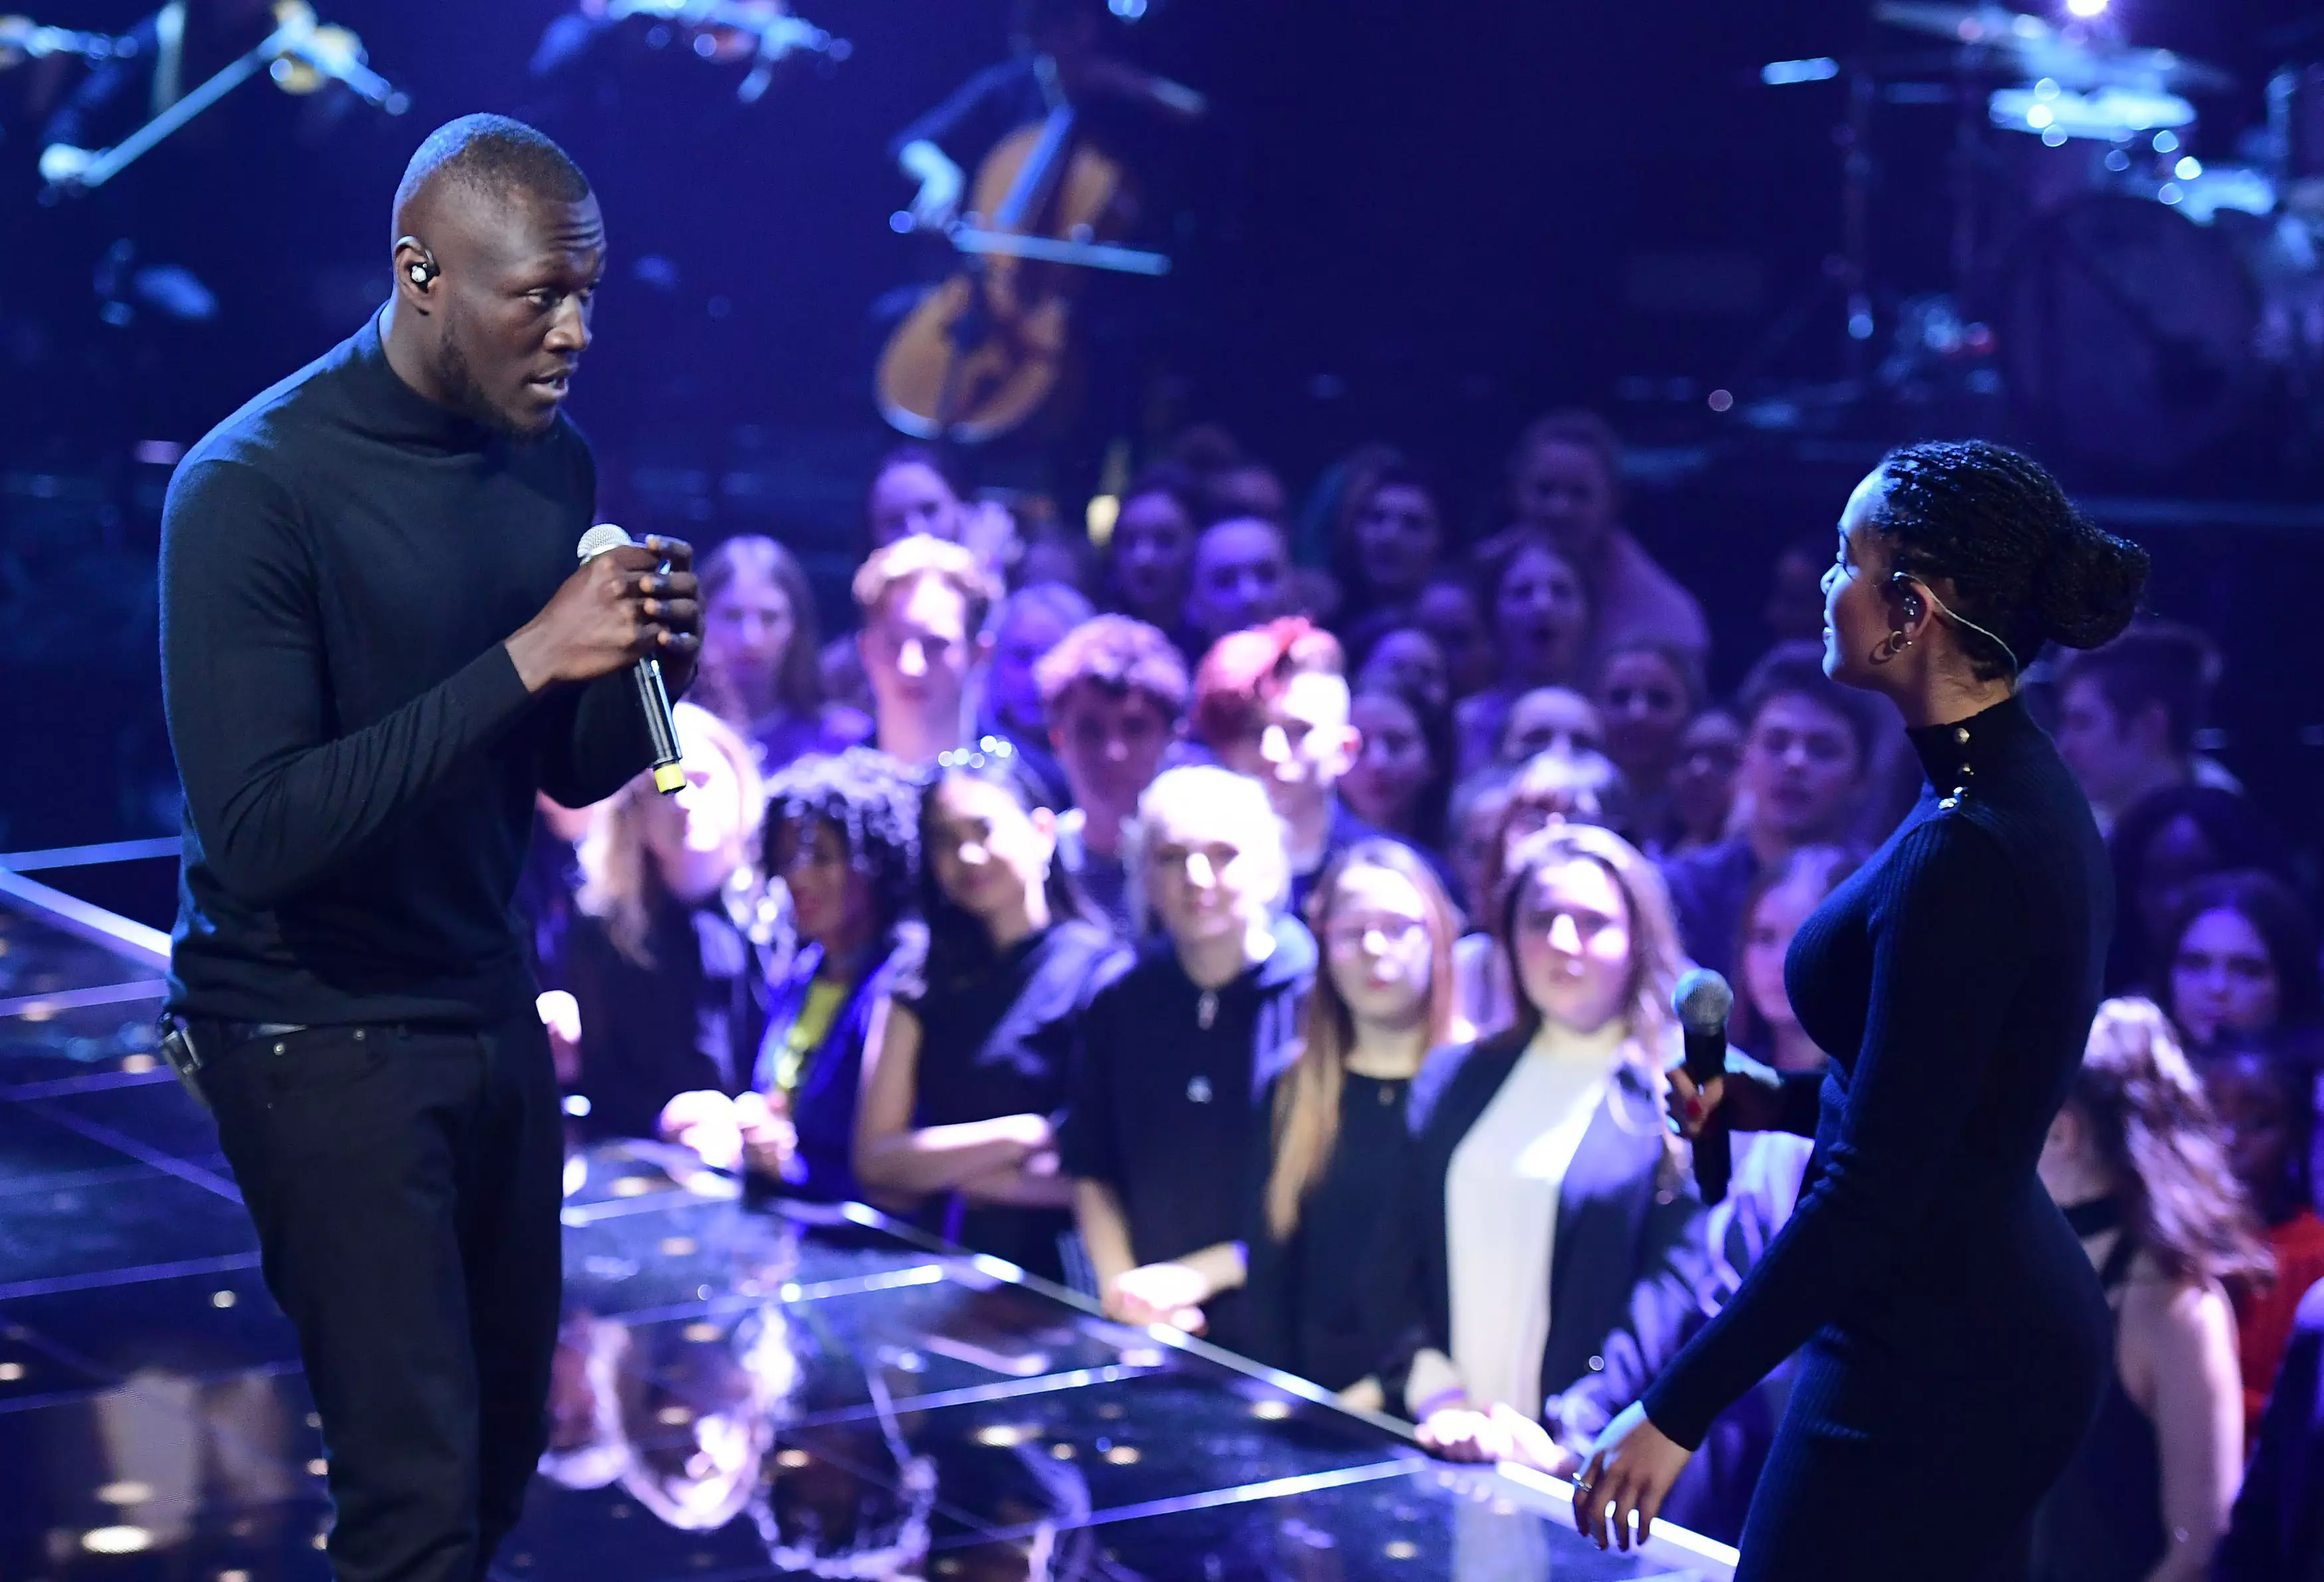 Stormzy and Jorja performing at the 2018 BRIT Awards nominations event.